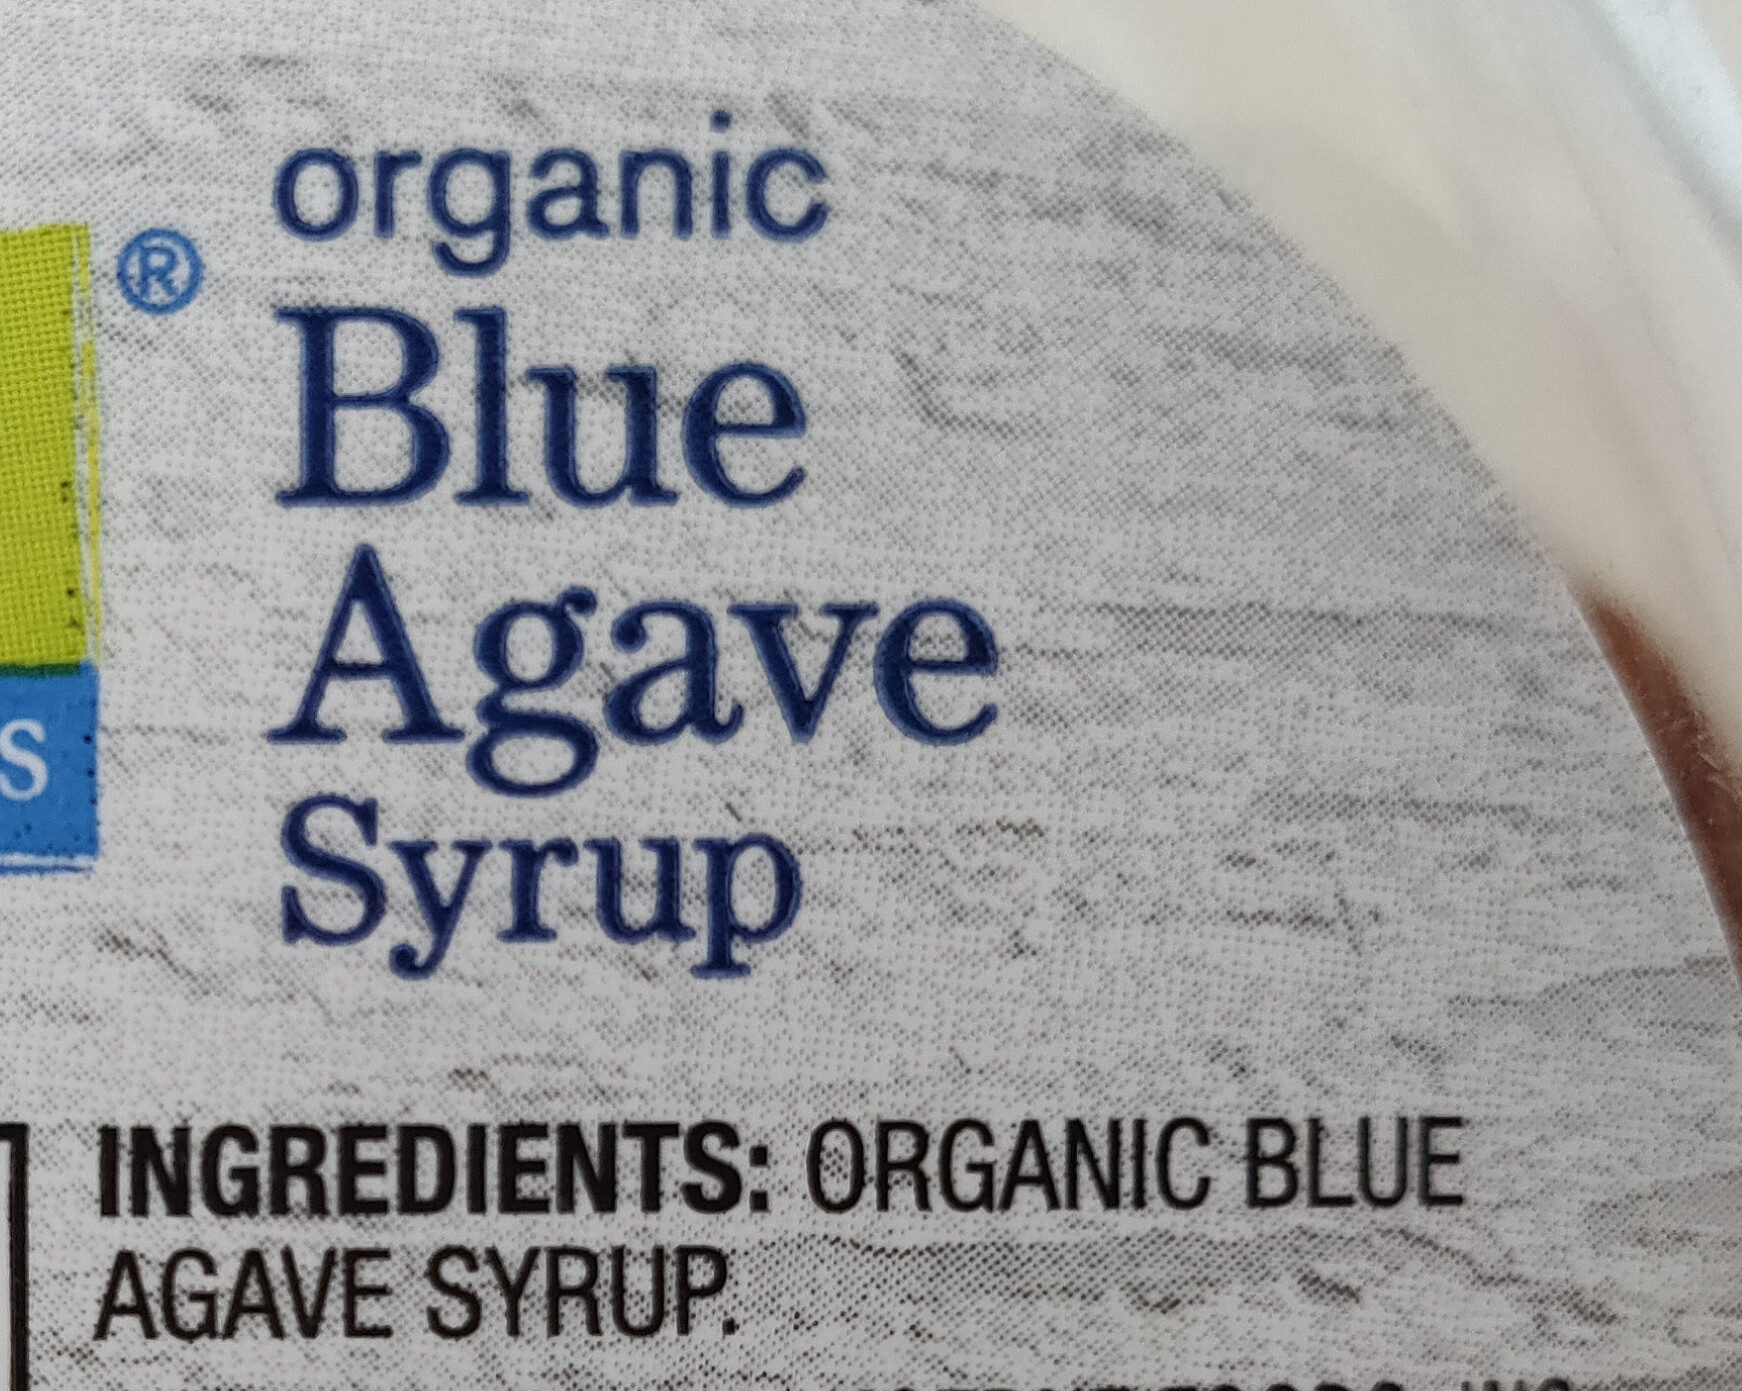 Blue agave syrup - Ingredients